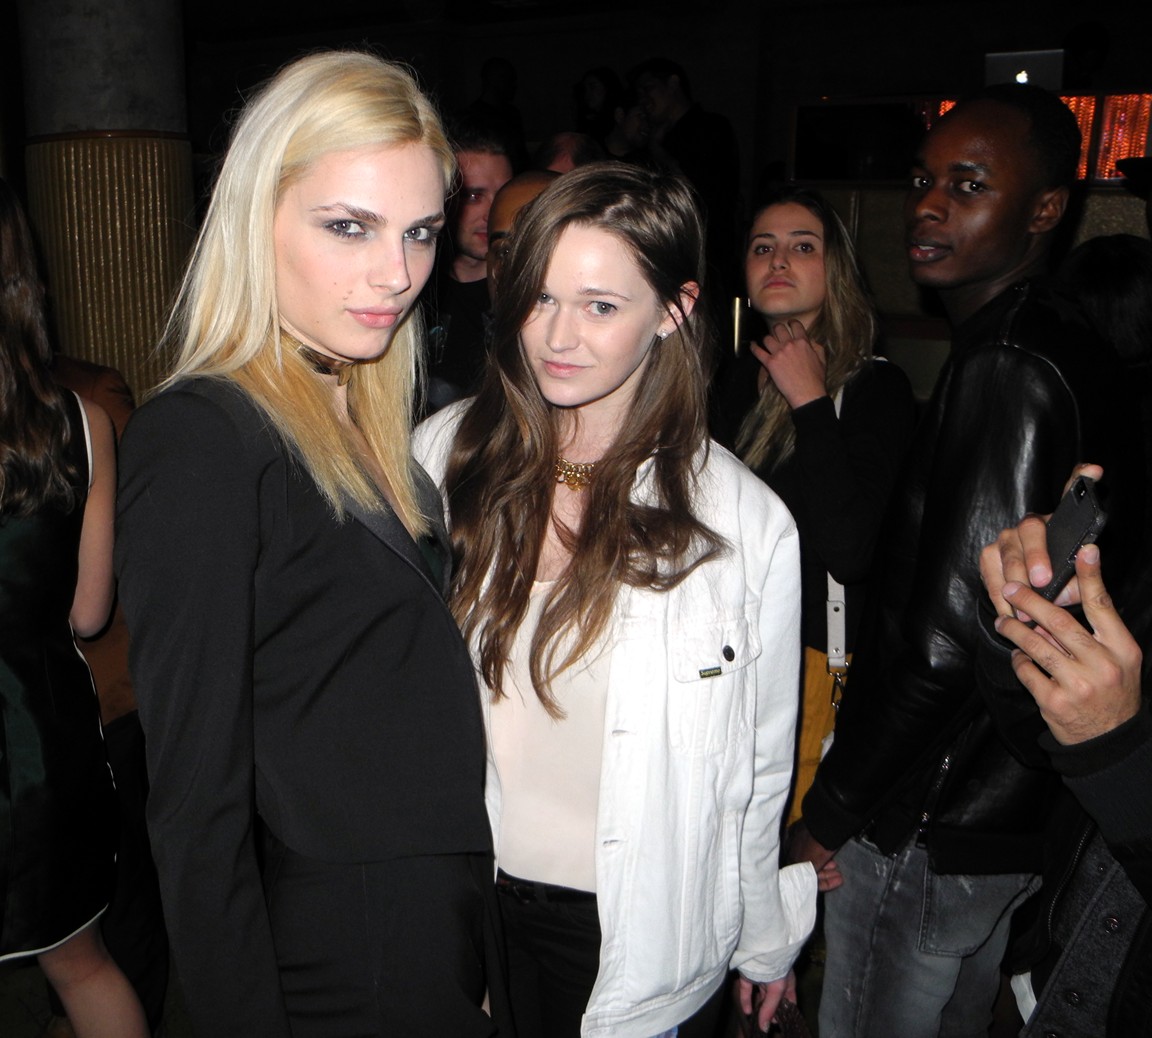 ANDREJ PEJIC & SAM H. SNYDER JEWELRY LINE LAUNCH